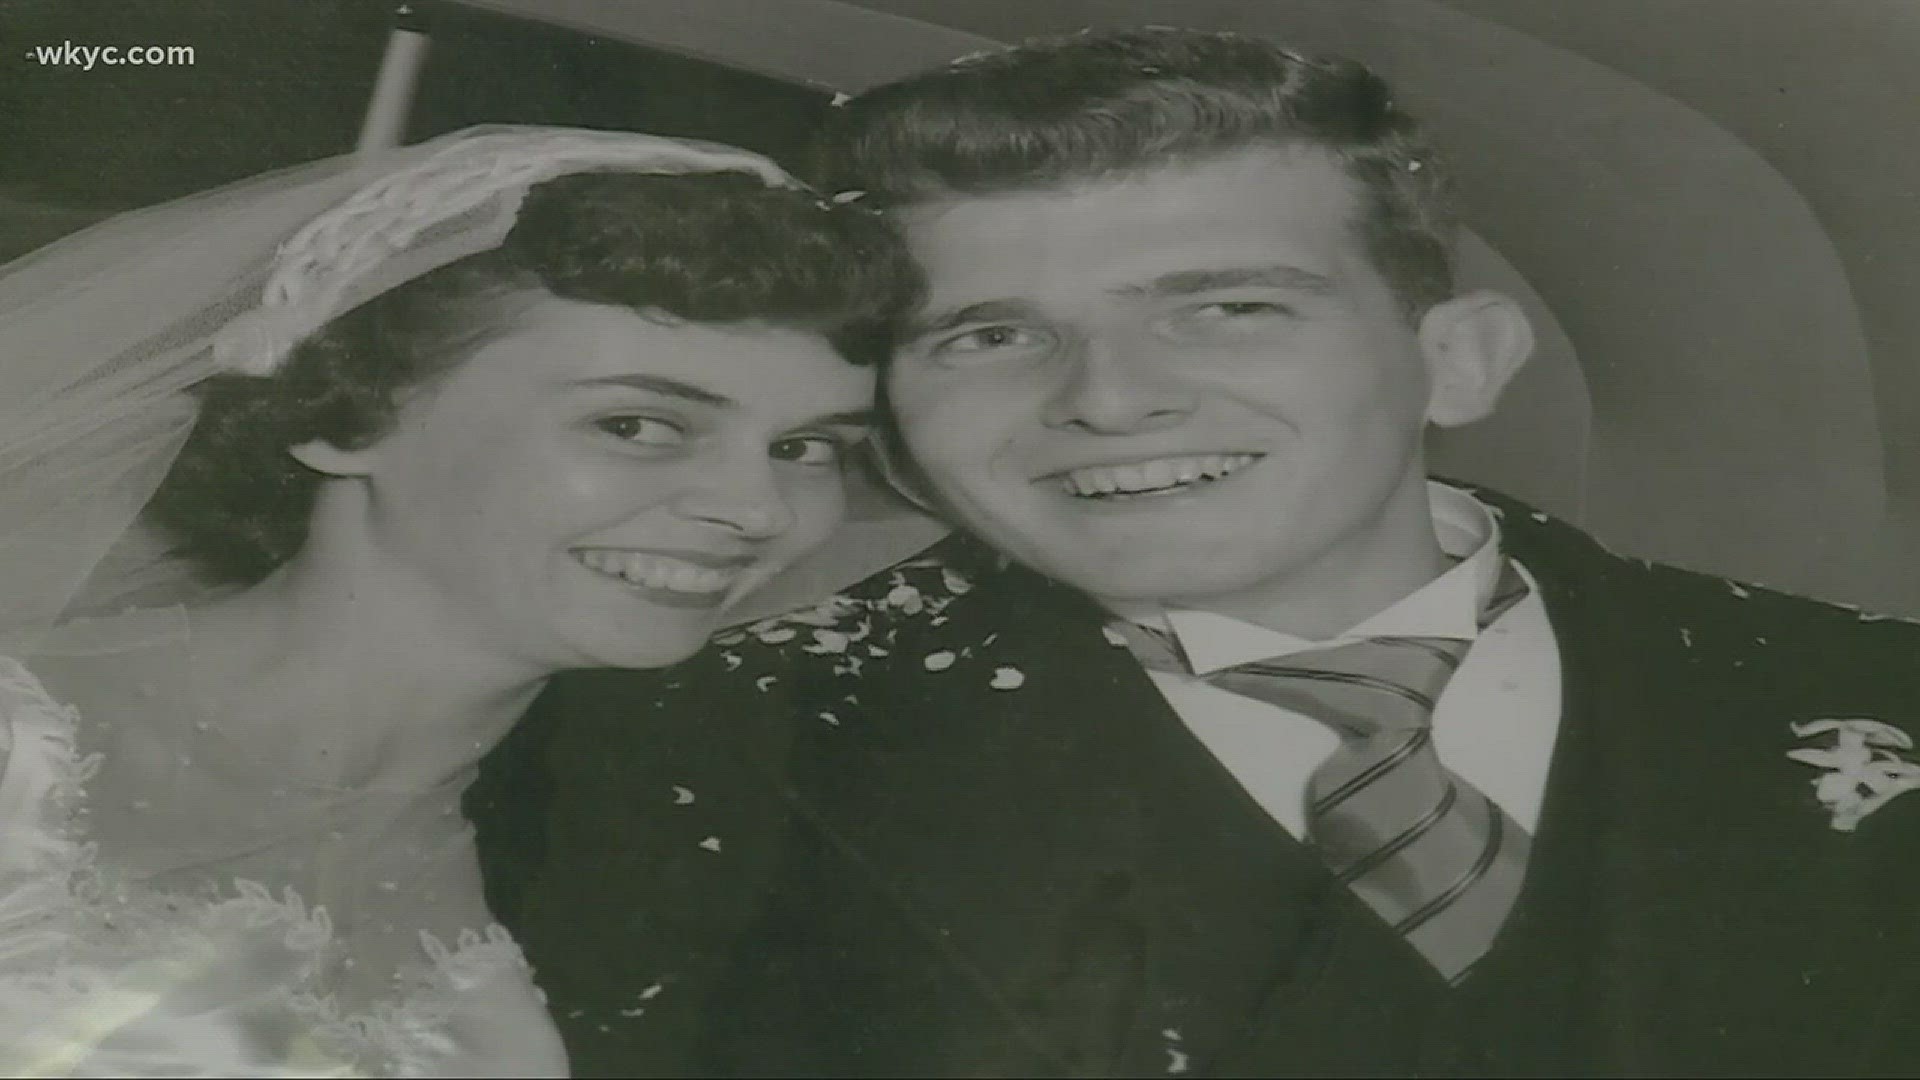 Feb. 14, 2018: What's the secret to a long marriage? We found a couple in Avon who have been together for 70 years.